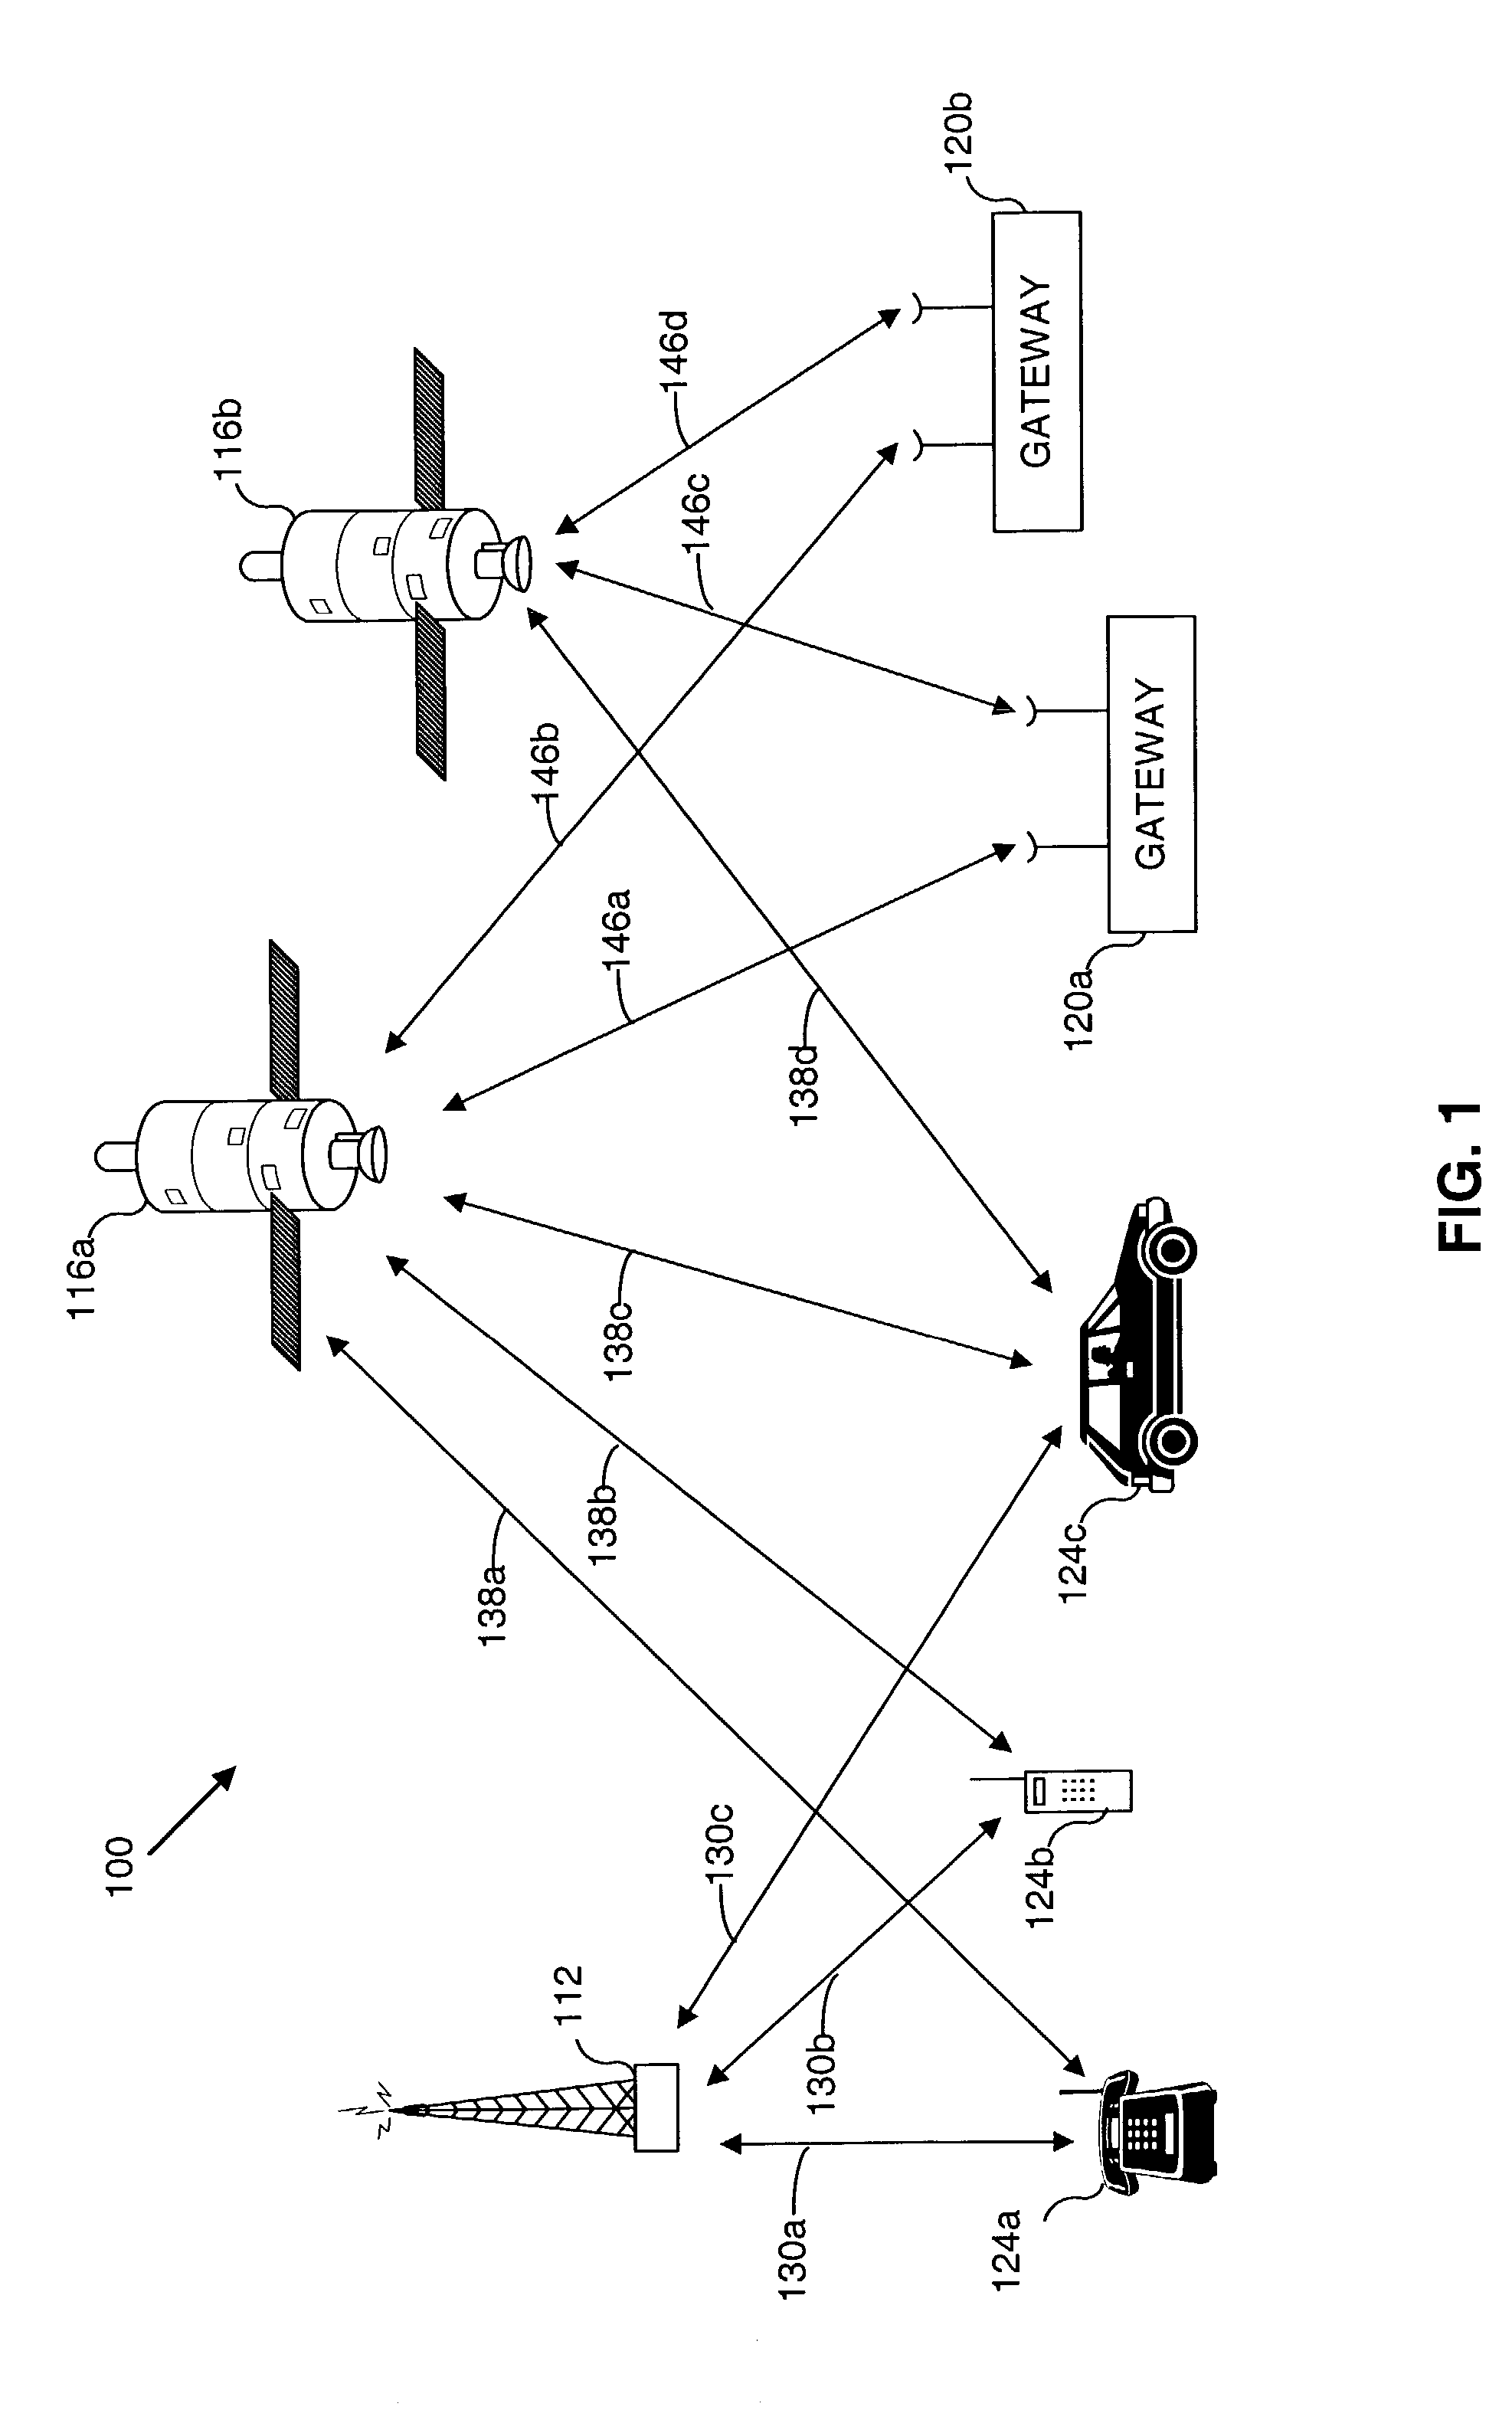 Synchronizing timing between multiple air link standard signals operating within a communications terminal